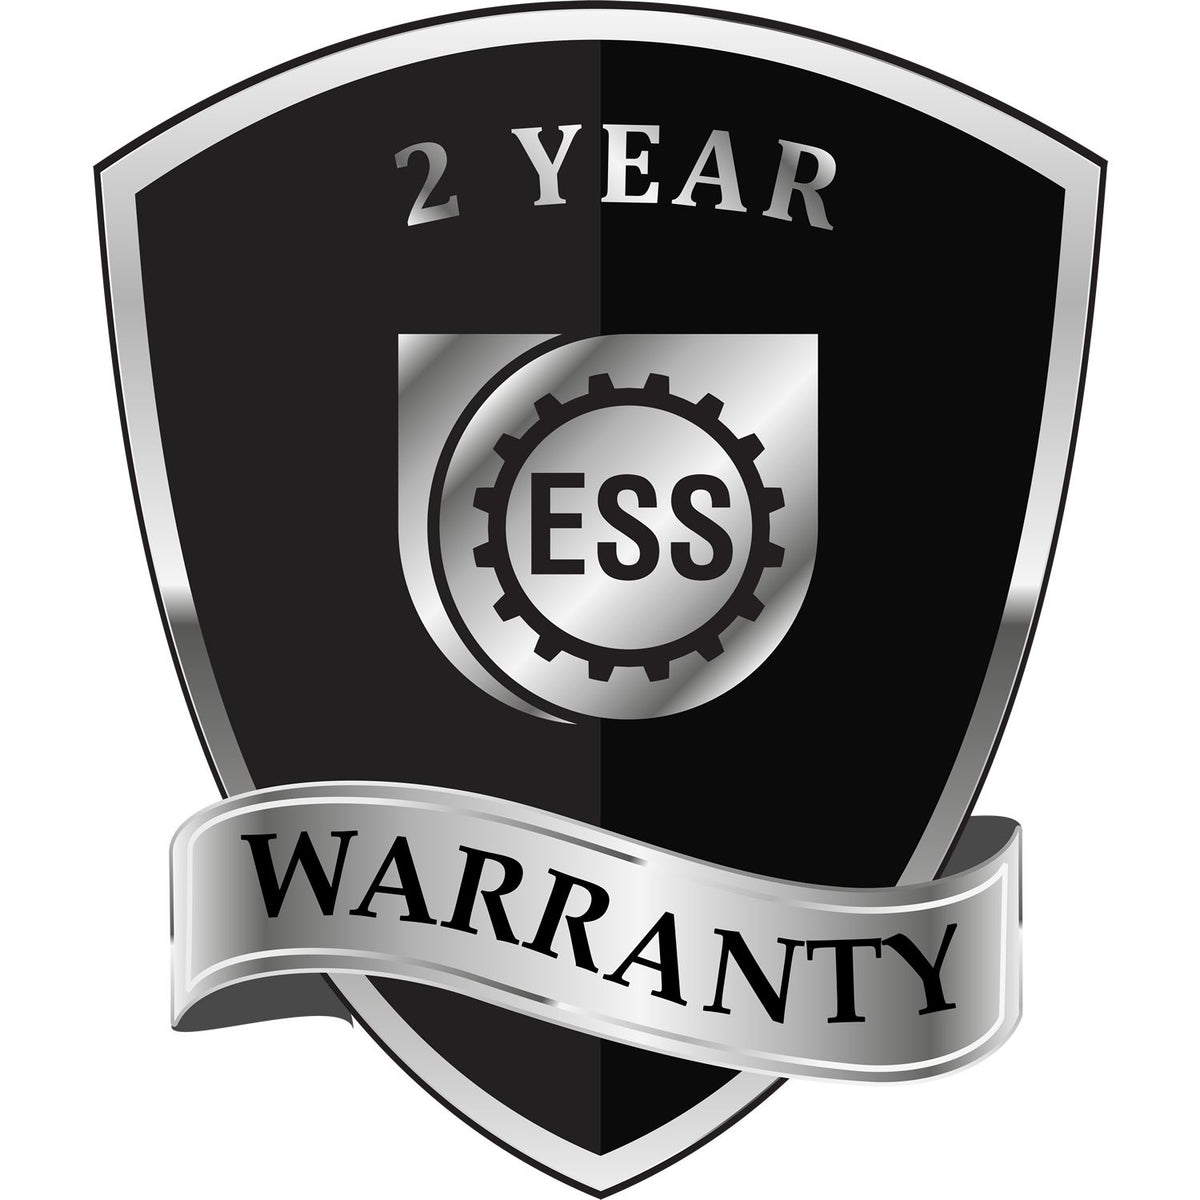 A badge or emblem showing a warranty icon for the Heavy Duty Cast Iron Michigan Architect Embosser